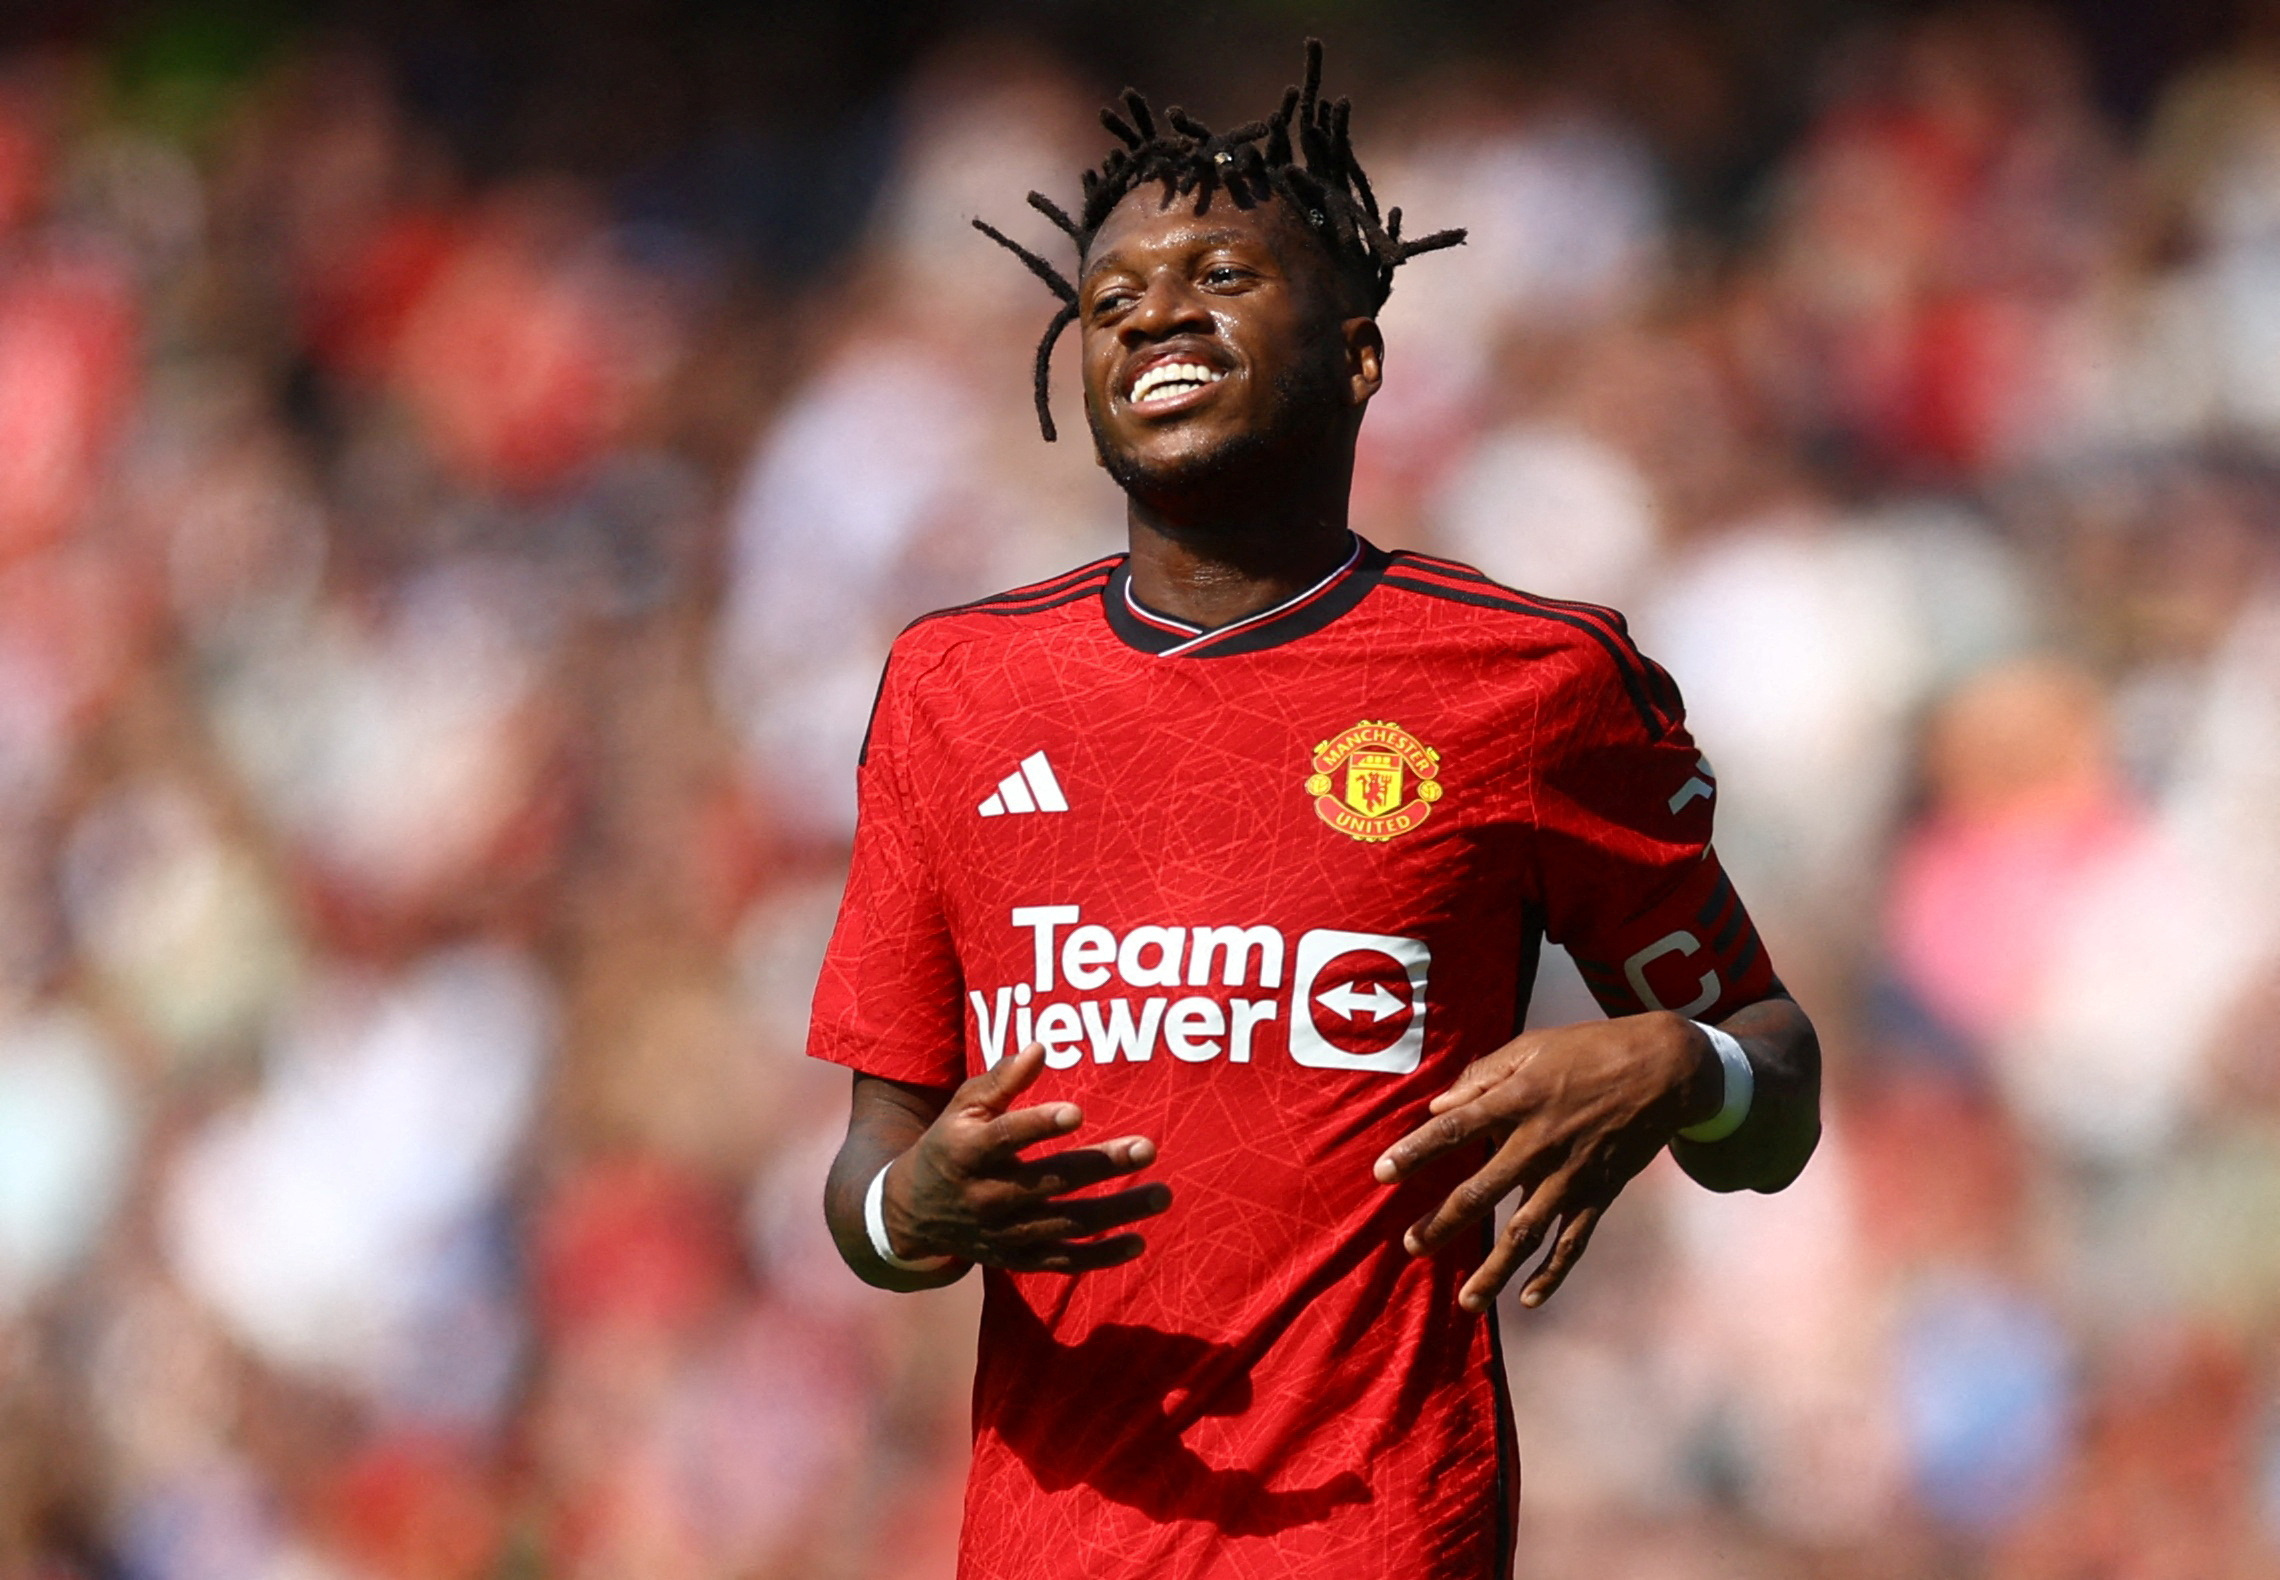 Man Utd agree deal to sell midfielder Fred to Fenerbahce